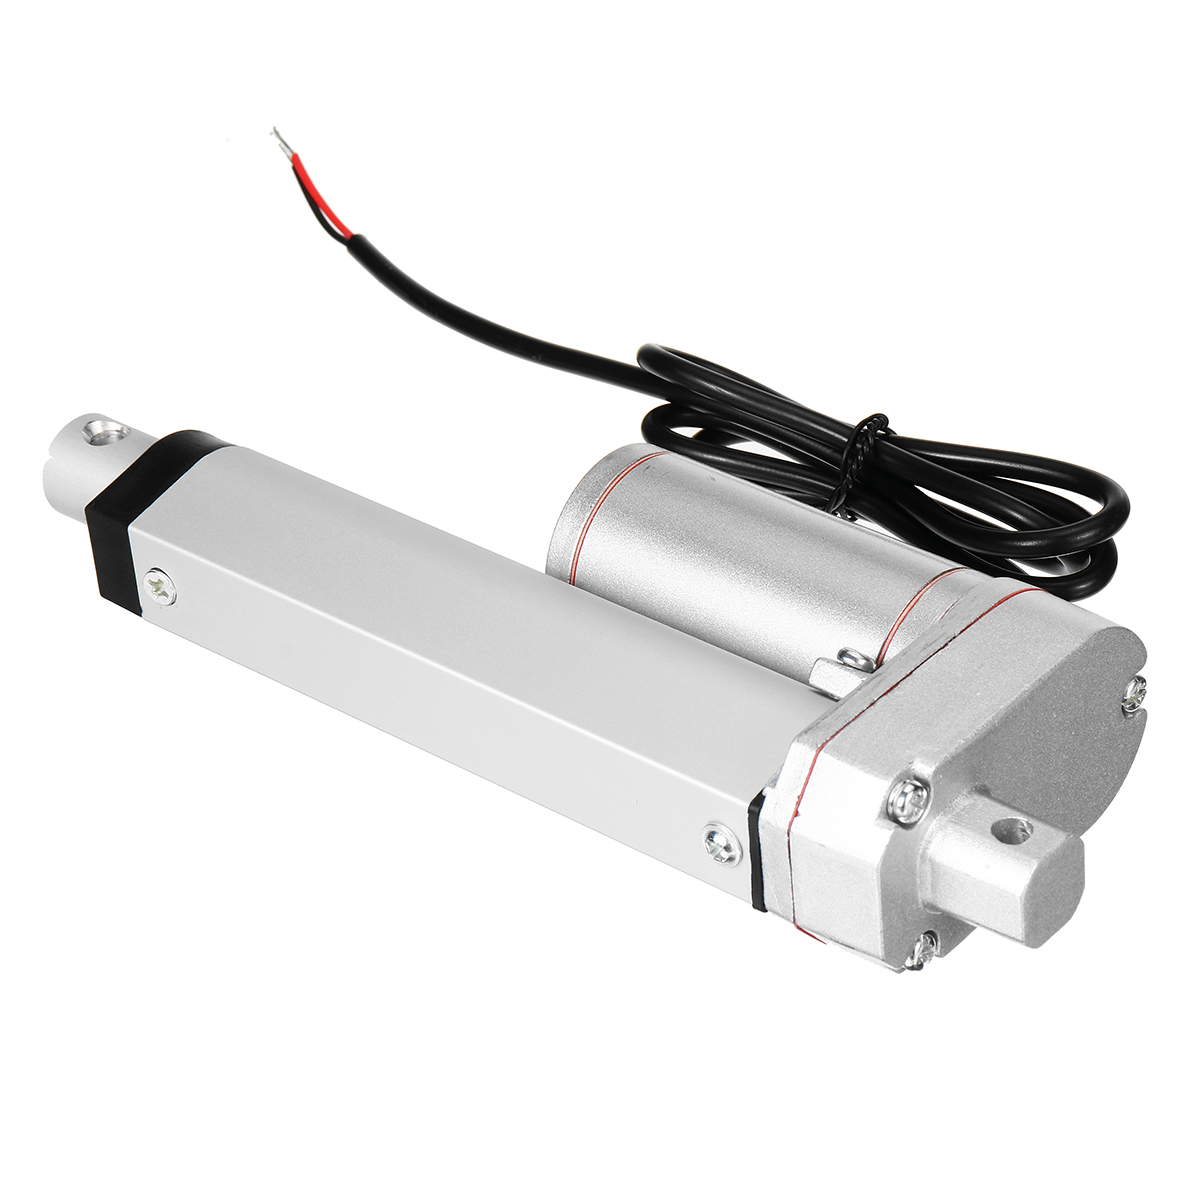 Find 12V 100-500MM 20MM/S 800N Stroke Tubular Motor Electric Linear Actuator Motor for Sale on Gipsybee.com with cryptocurrencies